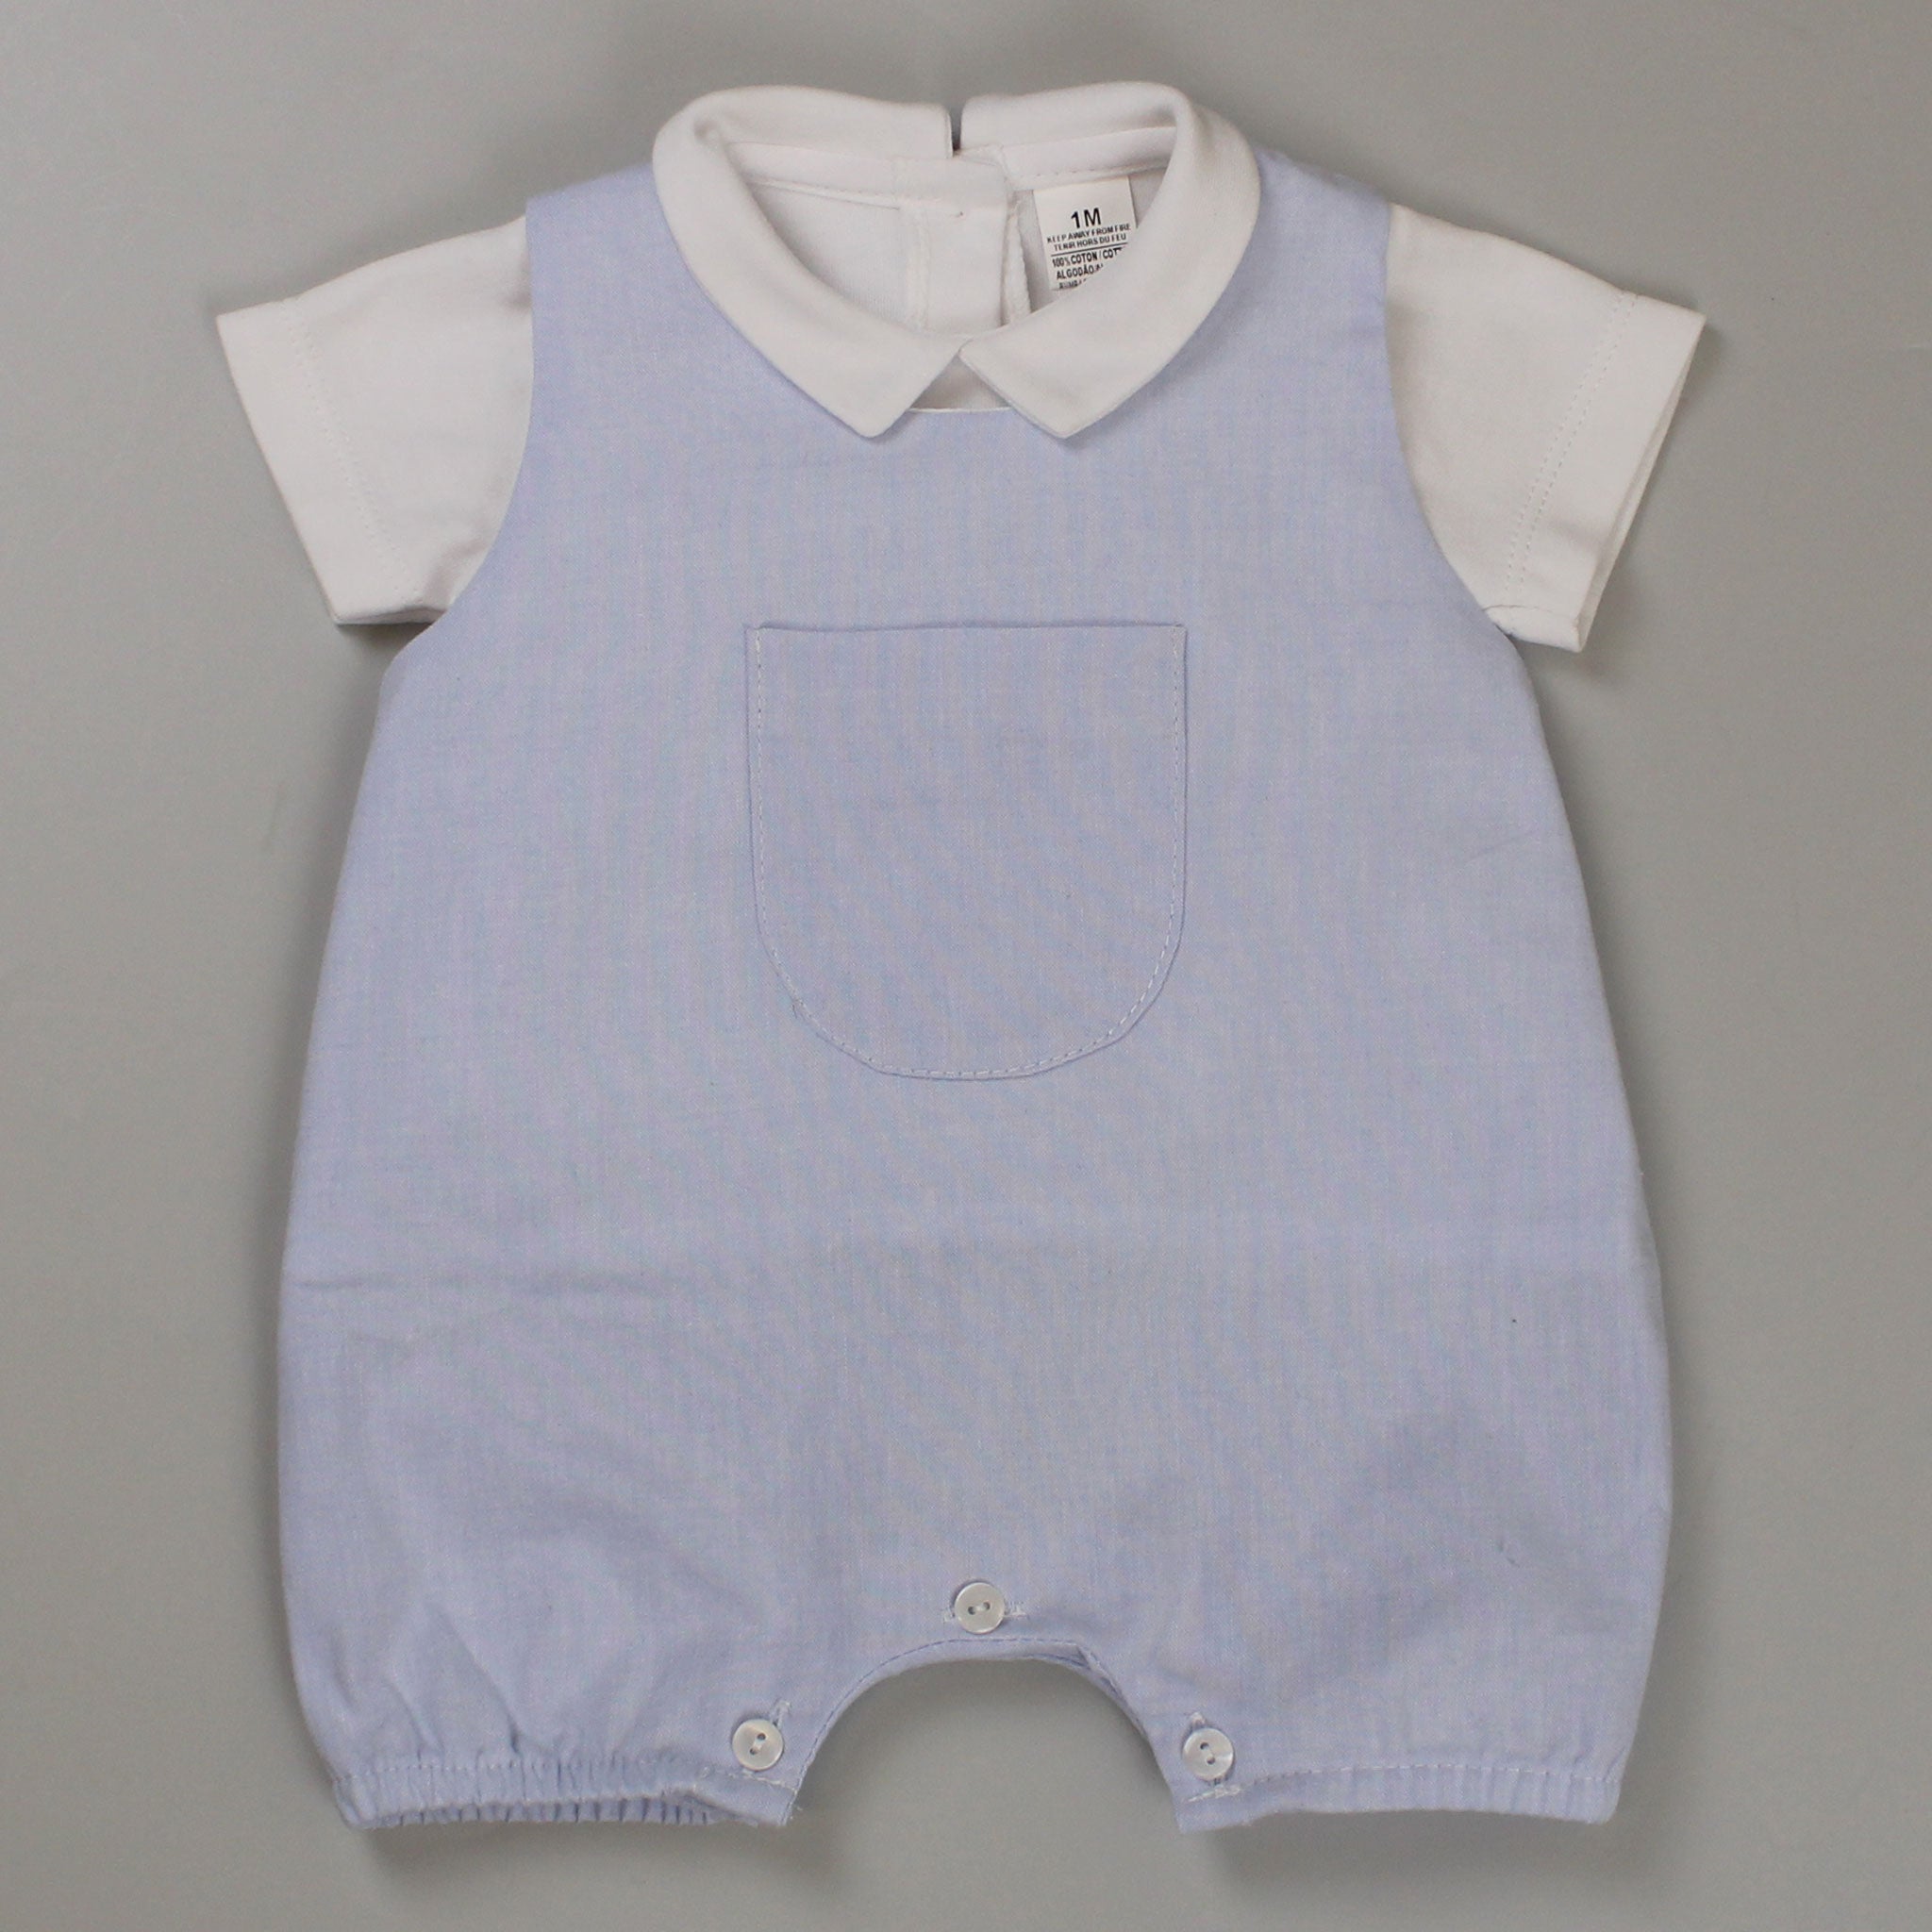 blue romper baby outfit